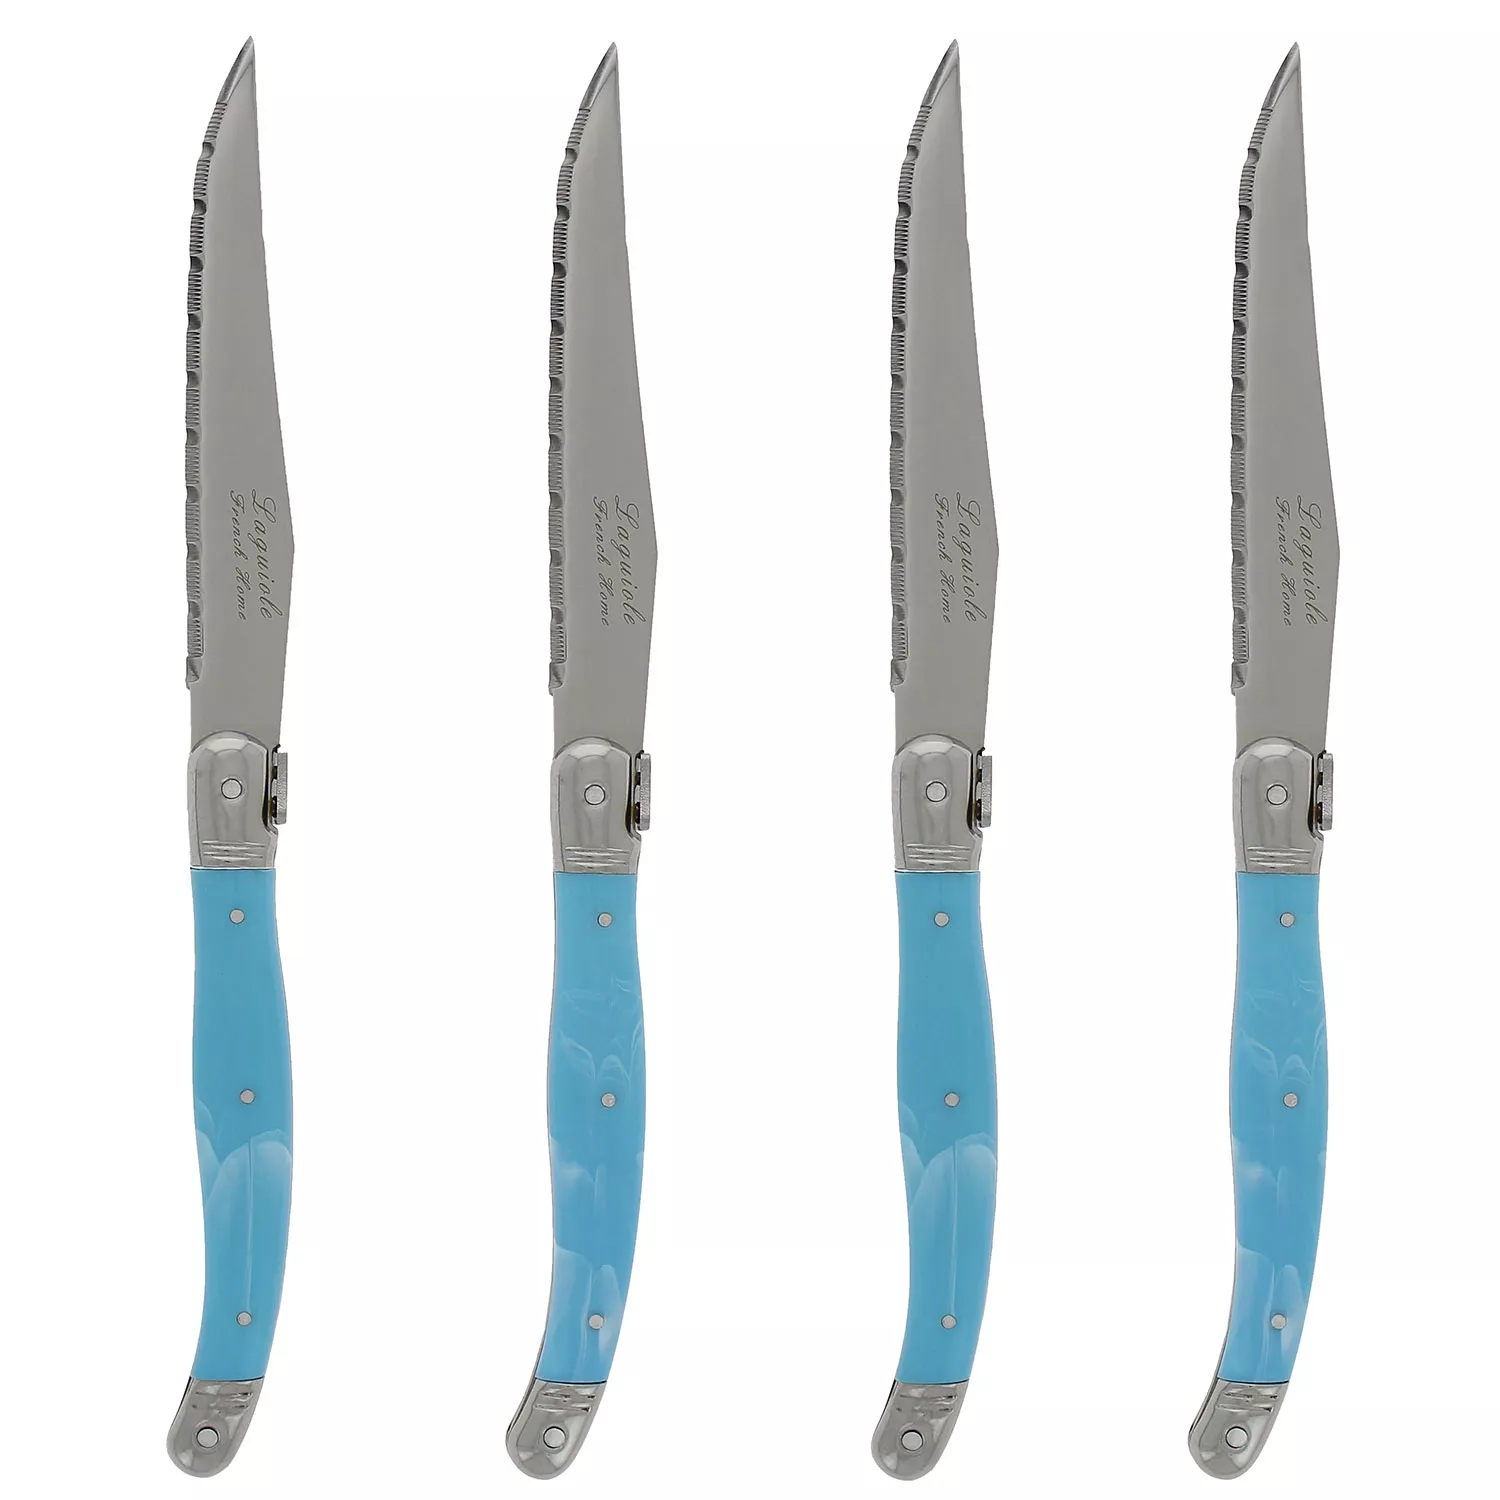 French Home Laguiole Steak Knives, Set of 4